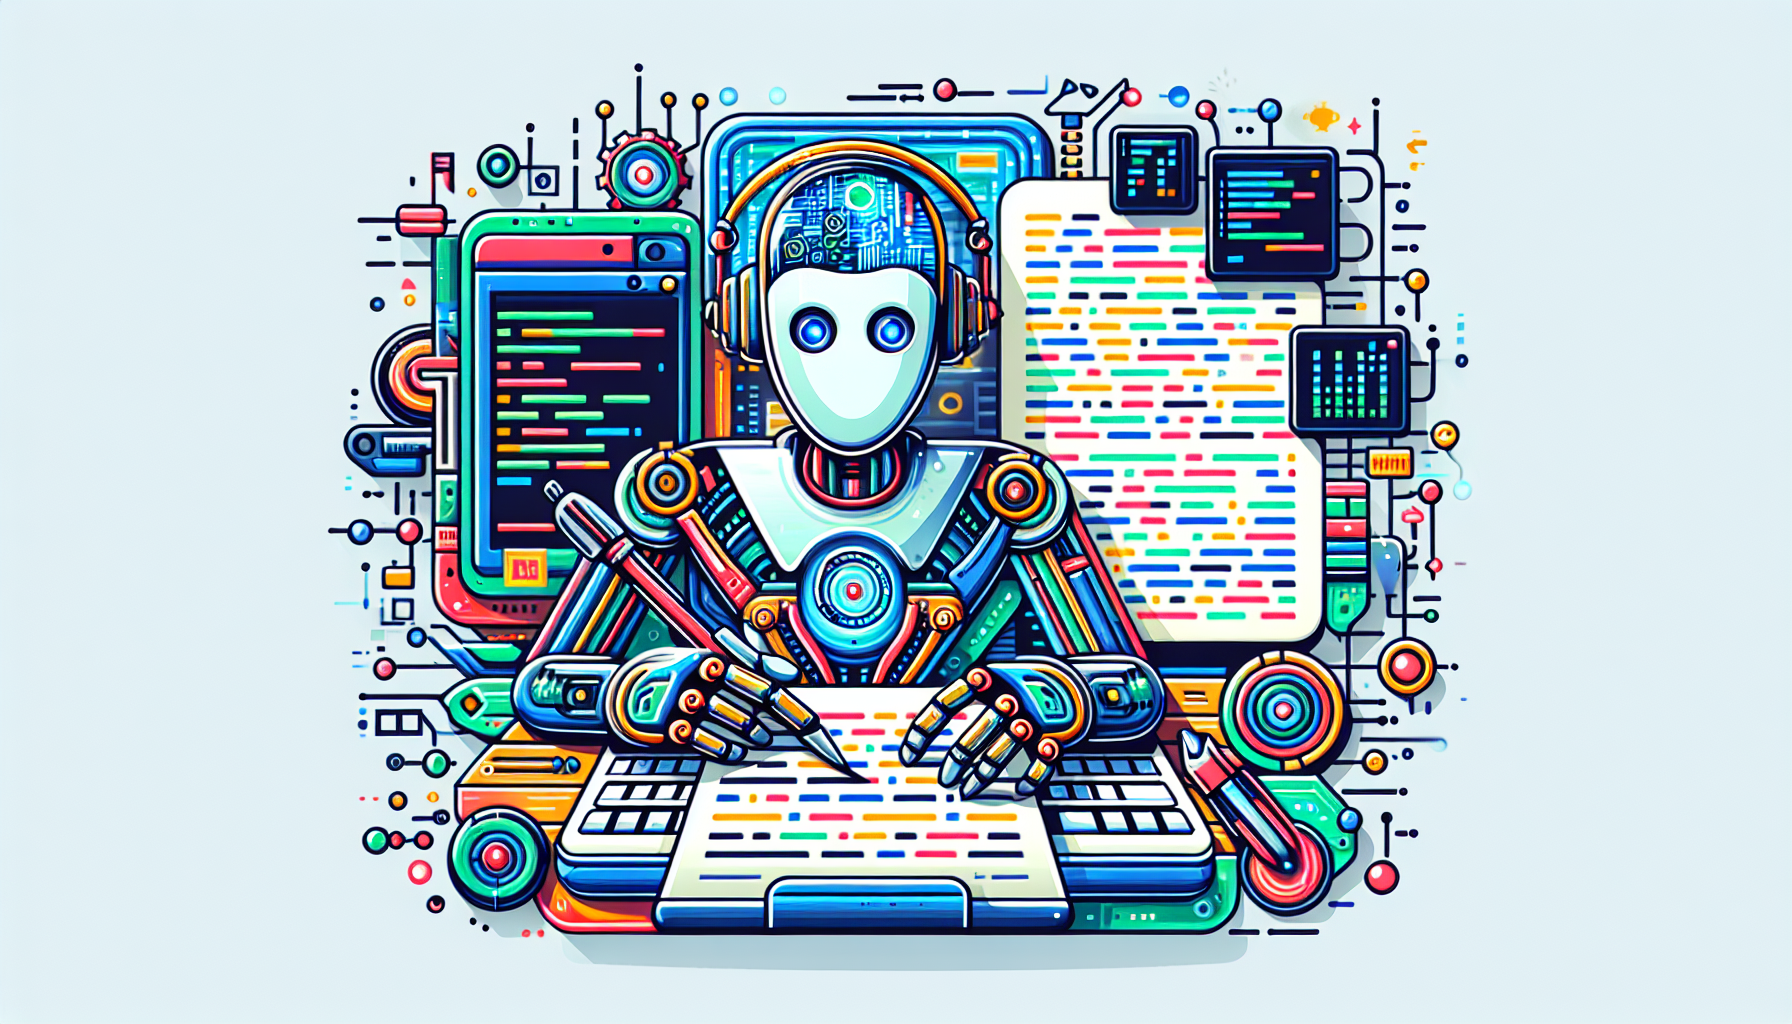 Create a colorful, modern-style illustration that metaphorically communicates the concept of AI screenwriting. The depiction could feature an AI robot diligently crafting a movie script on a futuristic digital device with complex coding visible on its screen. There should be no words or text in the image, only salient digital and technologic designs offering a visual narrative of how AI screenwriting works.